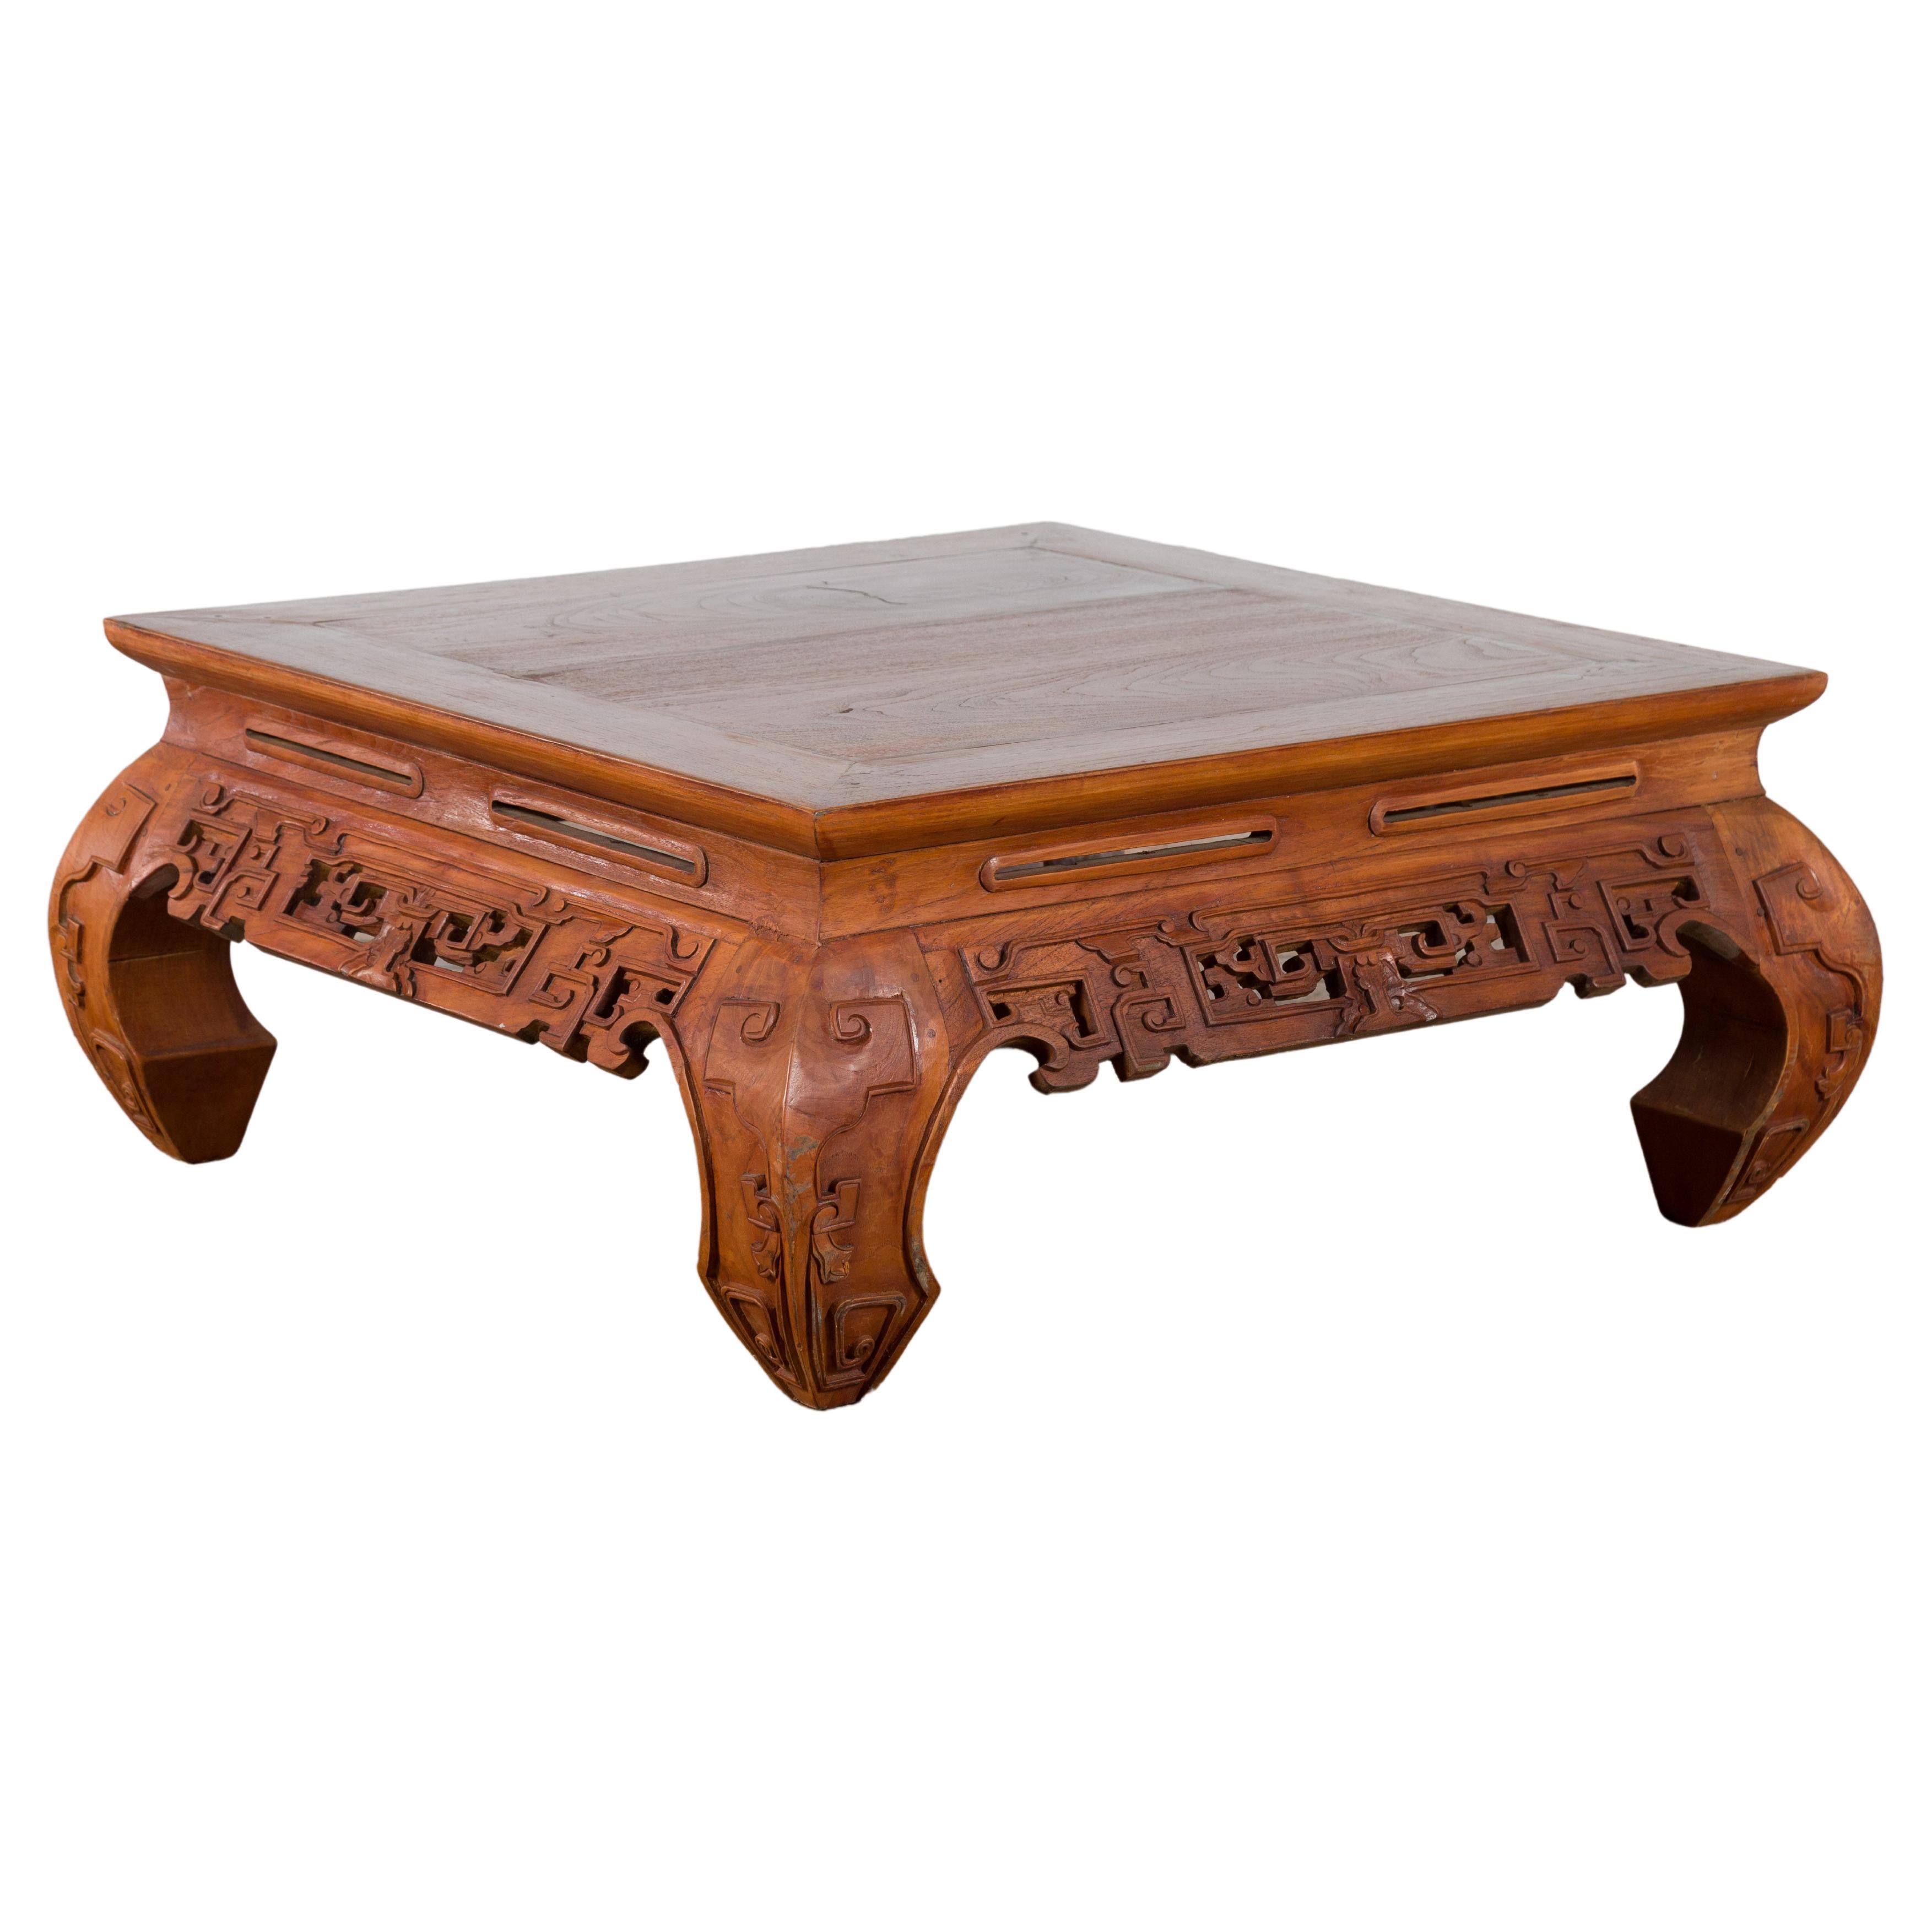 An Indonesian small coffee table from the mid 20th century, with carved apron, chow legs and brown patina. Created in Indonesia during the Midcentury period, this small coffee table features a square top with central board, sitting above an